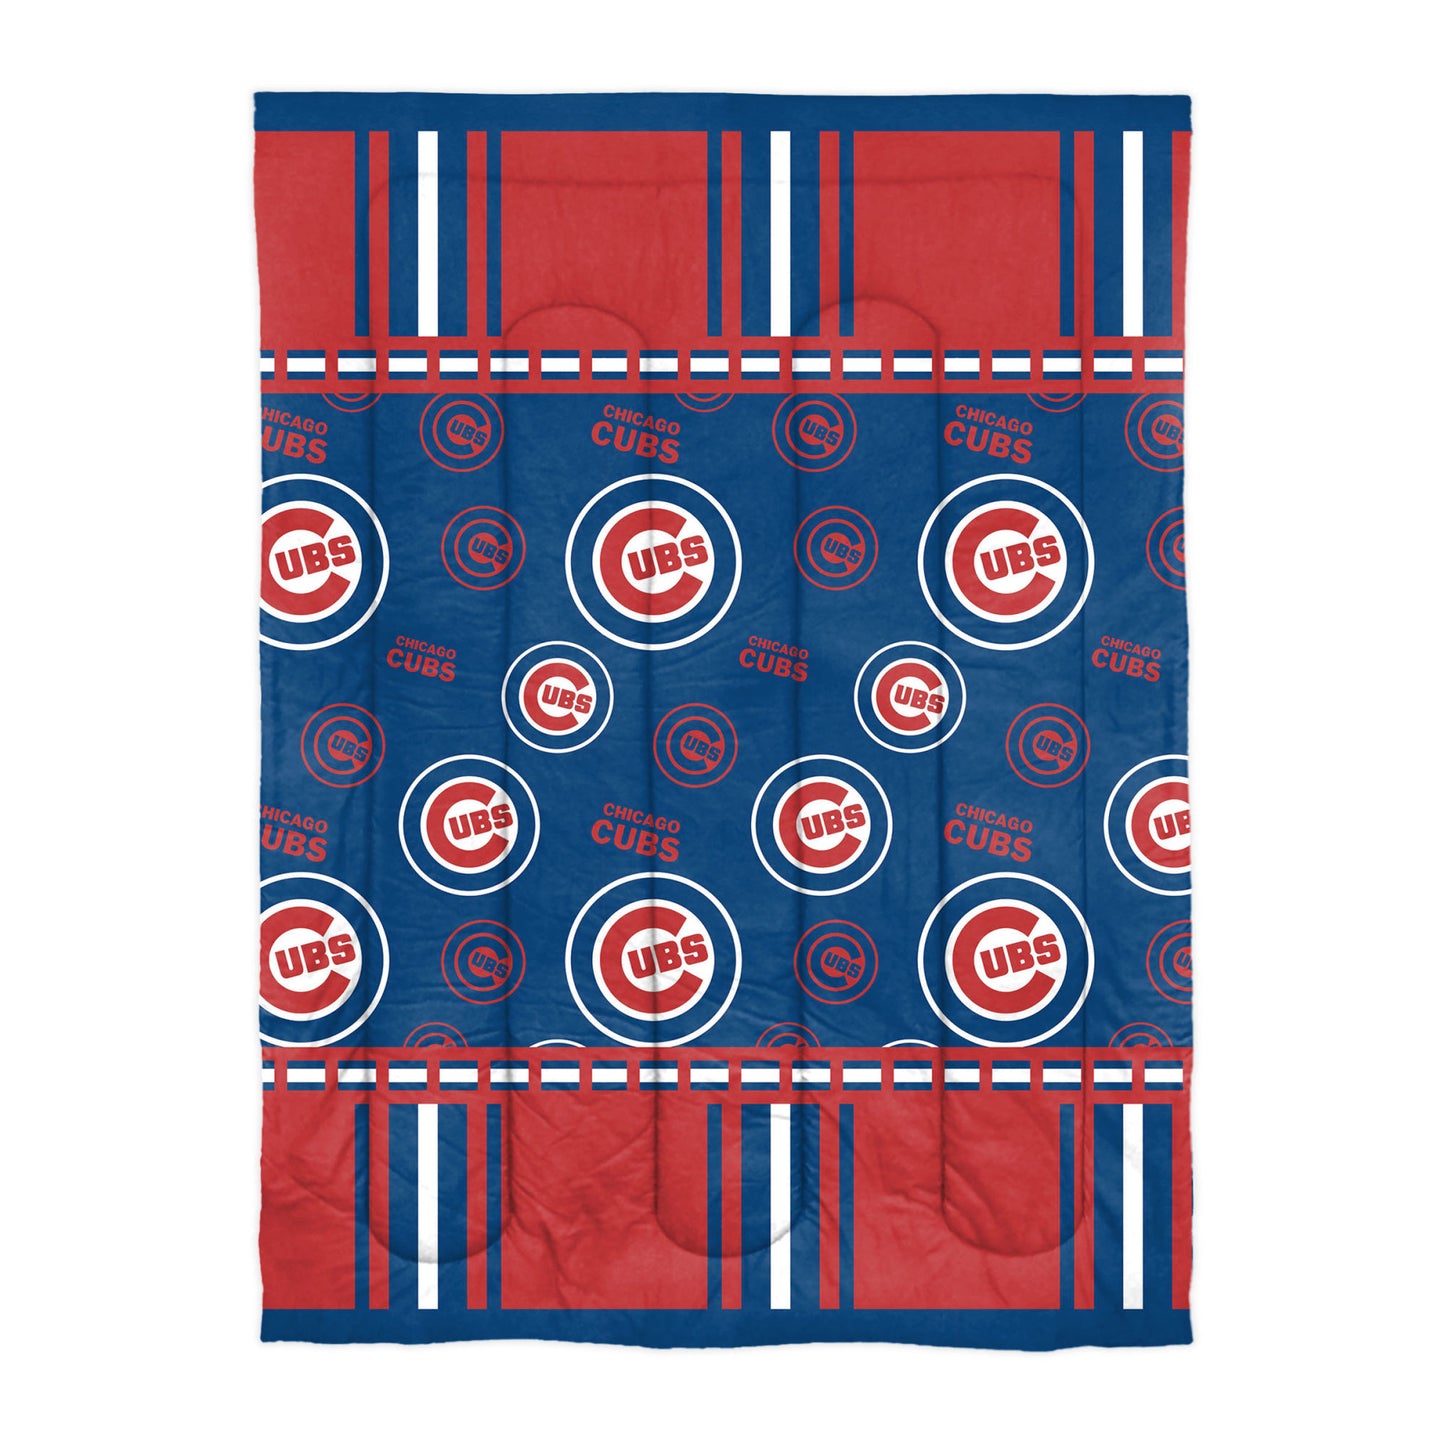 Chicago Cubs OFFICIAL MLB Twin Bed In Bag Set